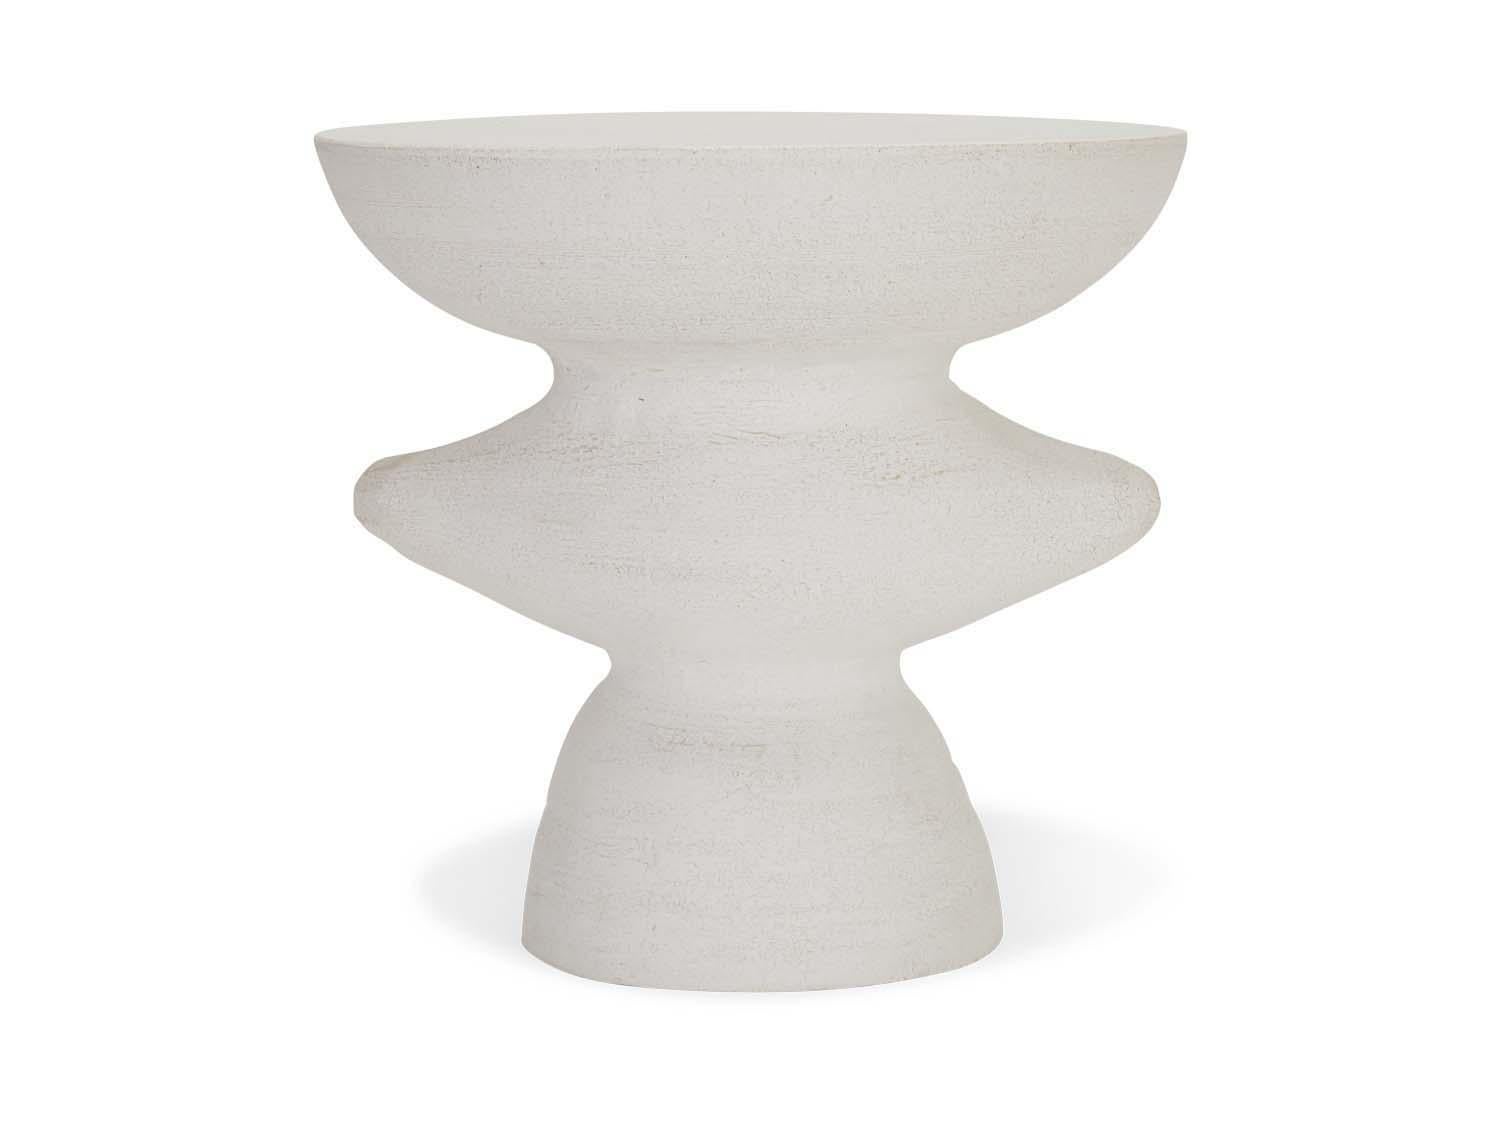 The Wing Table is handmade studio pottery by ceramic artist by Danny Kaplan. Please note exact dimensions may vary.

Born in New York City and raised in Aix-en-Provence, France, Danny Kaplan’s passion for ceramics was shaped by early exposure to